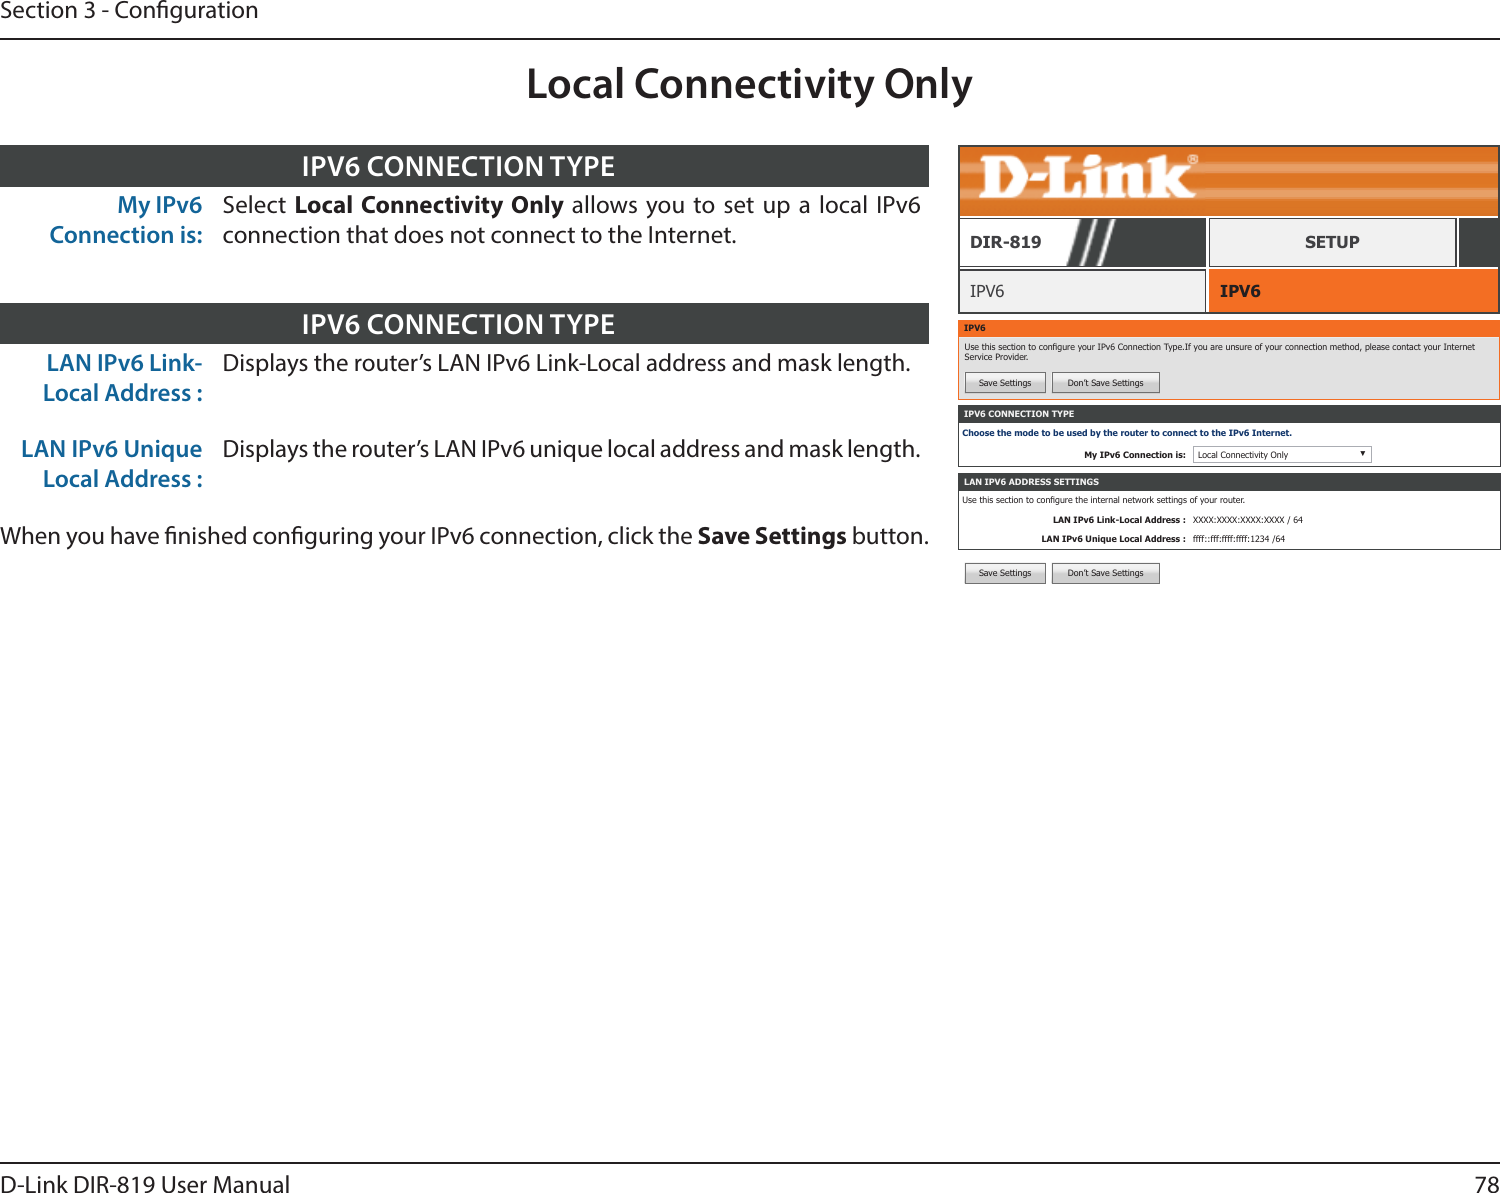 78D-Link DIR-819 User ManualSection 3 - CongurationLocal Connectivity OnlyIPV6 CONNECTION TYPEChoose the mode to be used by the router to connect to the IPv6 Internet.My IPv6 Connection is: Local Connectivity Only ▼IPV6 IPV6DIR-819 SETUPIPV6Use this section to congure your IPv6 Connection Type.If you are unsure of your connection method, please contact your Internet Service Provider.Save Settings Don’t Save SettingsLAN IPV6 ADDRESS SETTINGSUse this section to congure the internal network settings of your router.LAN IPv6 Link-Local Address : XXXX:XXXX:XXXX:XXXX / 64LAN IPv6 Unique Local Address : ffff::fff:ffff:ffff:1234 /64Save Settings Don’t Save SettingsMy IPv6 Connection is:Select  Local Connectivity Only allows you to set up a local IPv6 connection that does not connect to the Internet.IPV6 CONNECTION TYPELAN IPv6 Link-Local Address :Displays the router’s LAN IPv6 Link-Local address and mask length.LAN IPv6 Unique Local Address :Displays the router’s LAN IPv6 unique local address and mask length.When you have nished conguring your IPv6 connection, click the Save Settings button.IPV6 CONNECTION TYPE